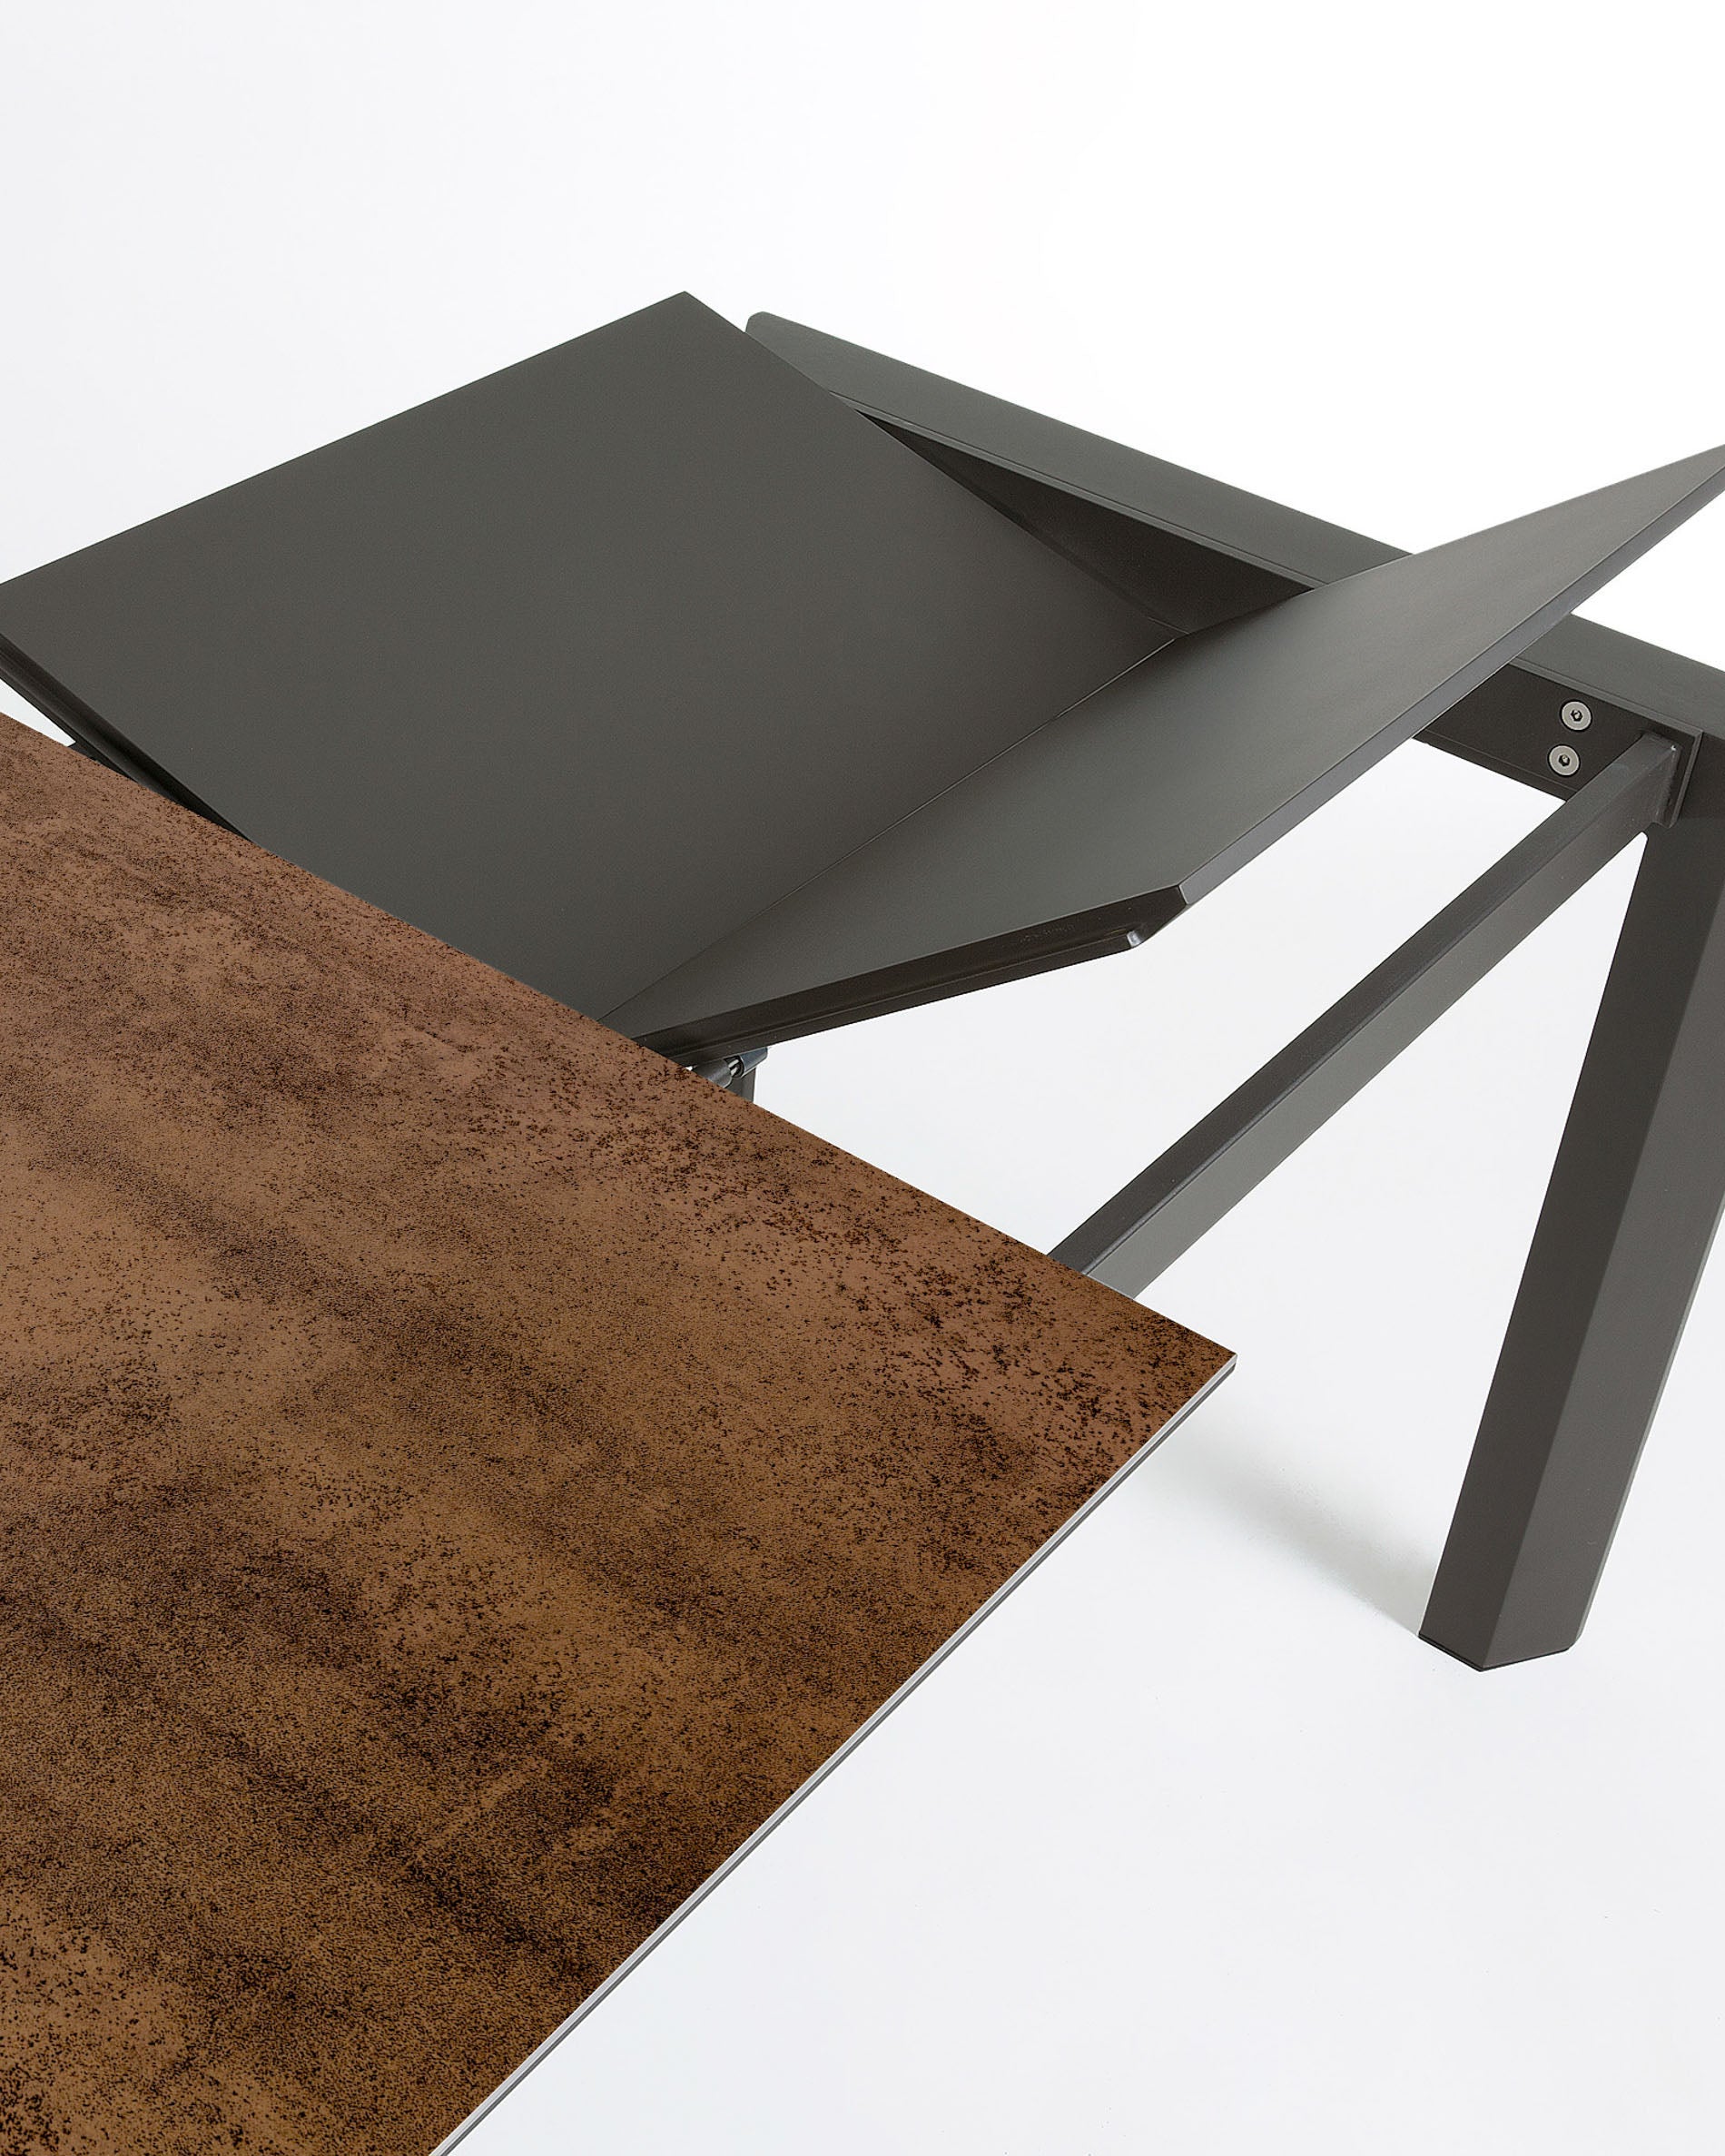 Axis extendable porcelain table with Iron Corten finish and dark gray legs, 120 (180) cm